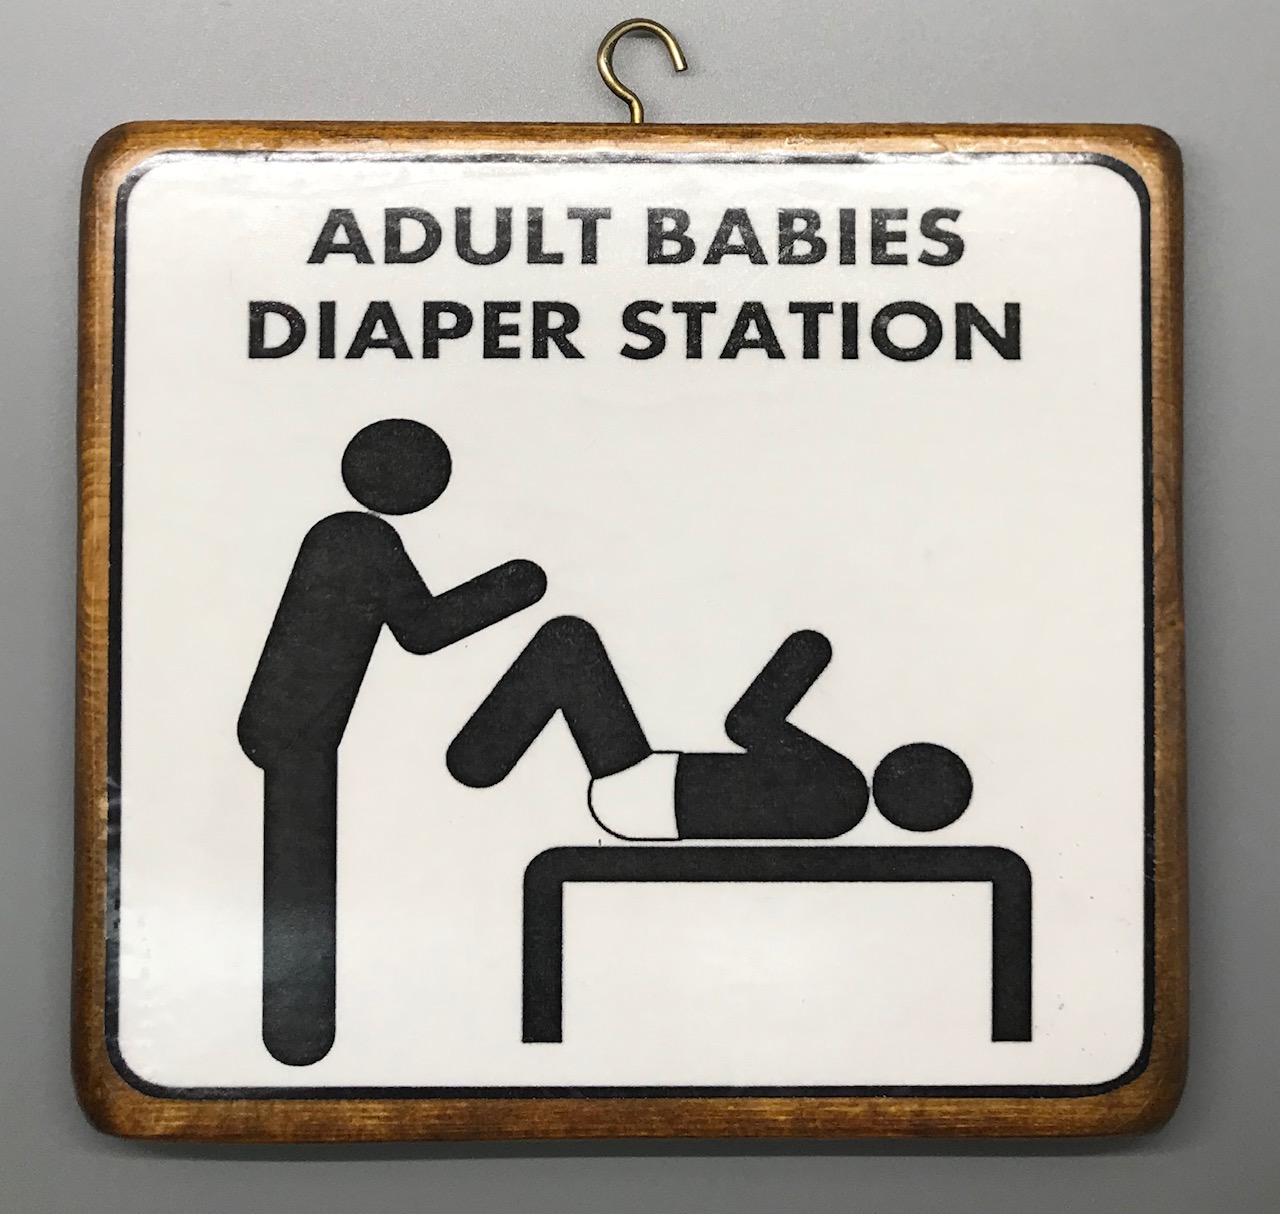 Adult Baby Diaper Station Plaque - Male Version